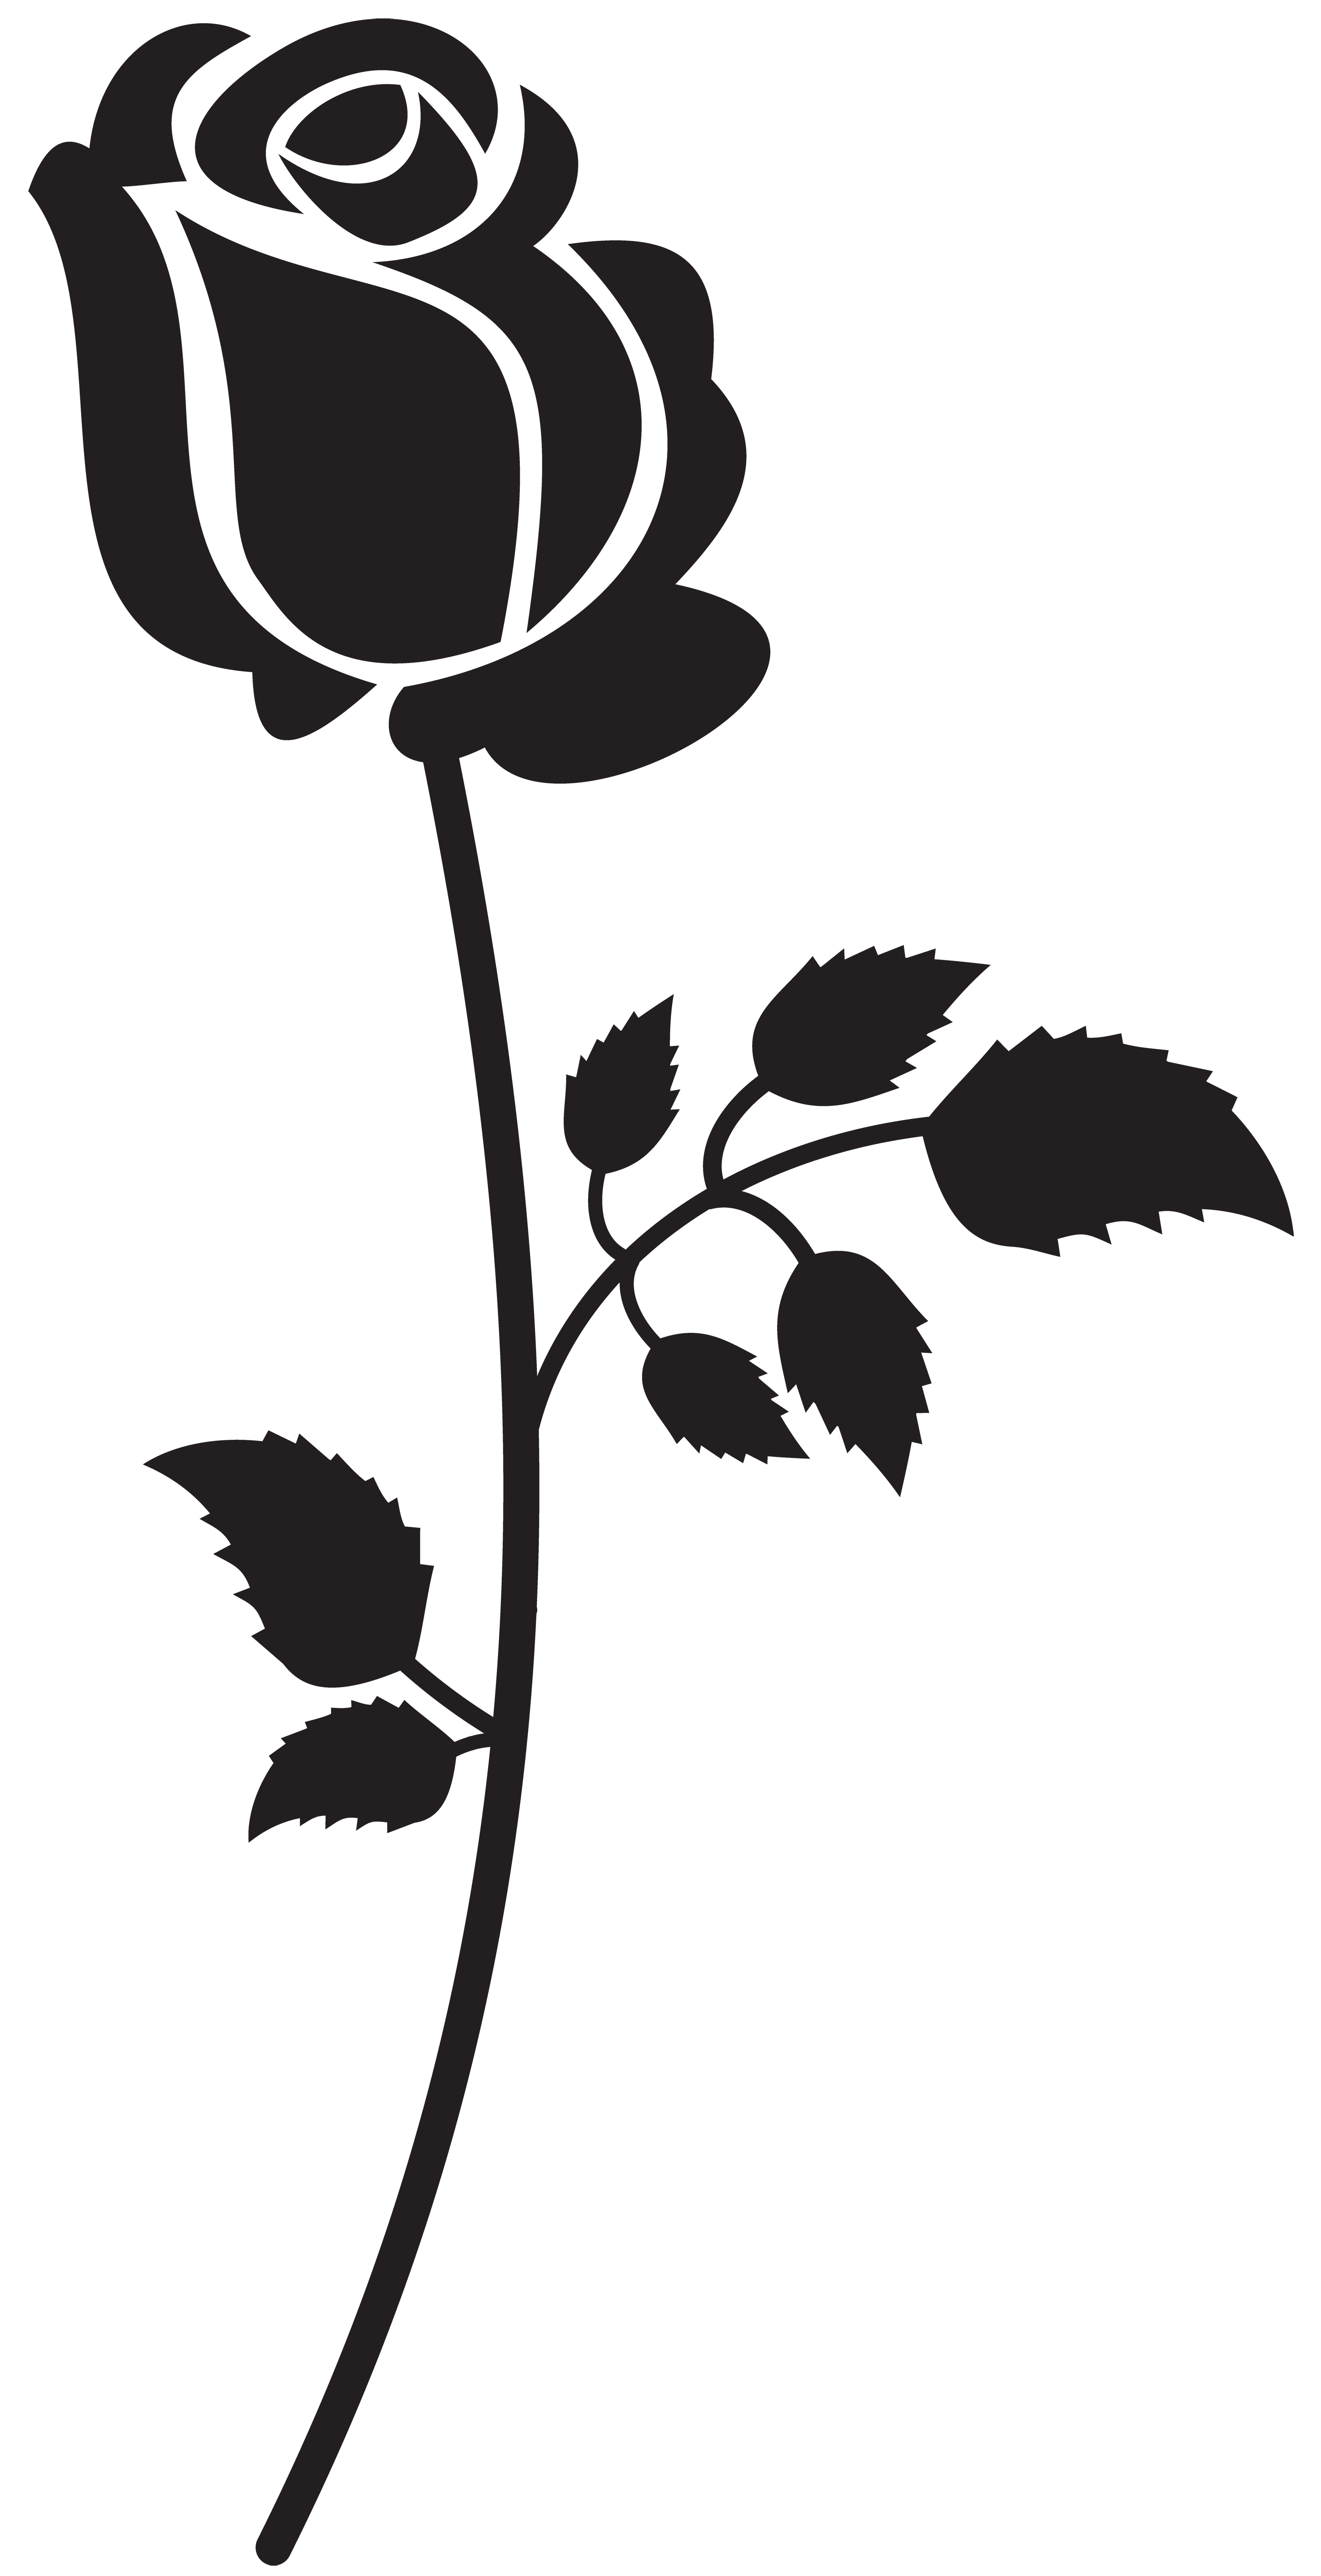 Beauty silhouette at getdrawings. Clipart roses black and white